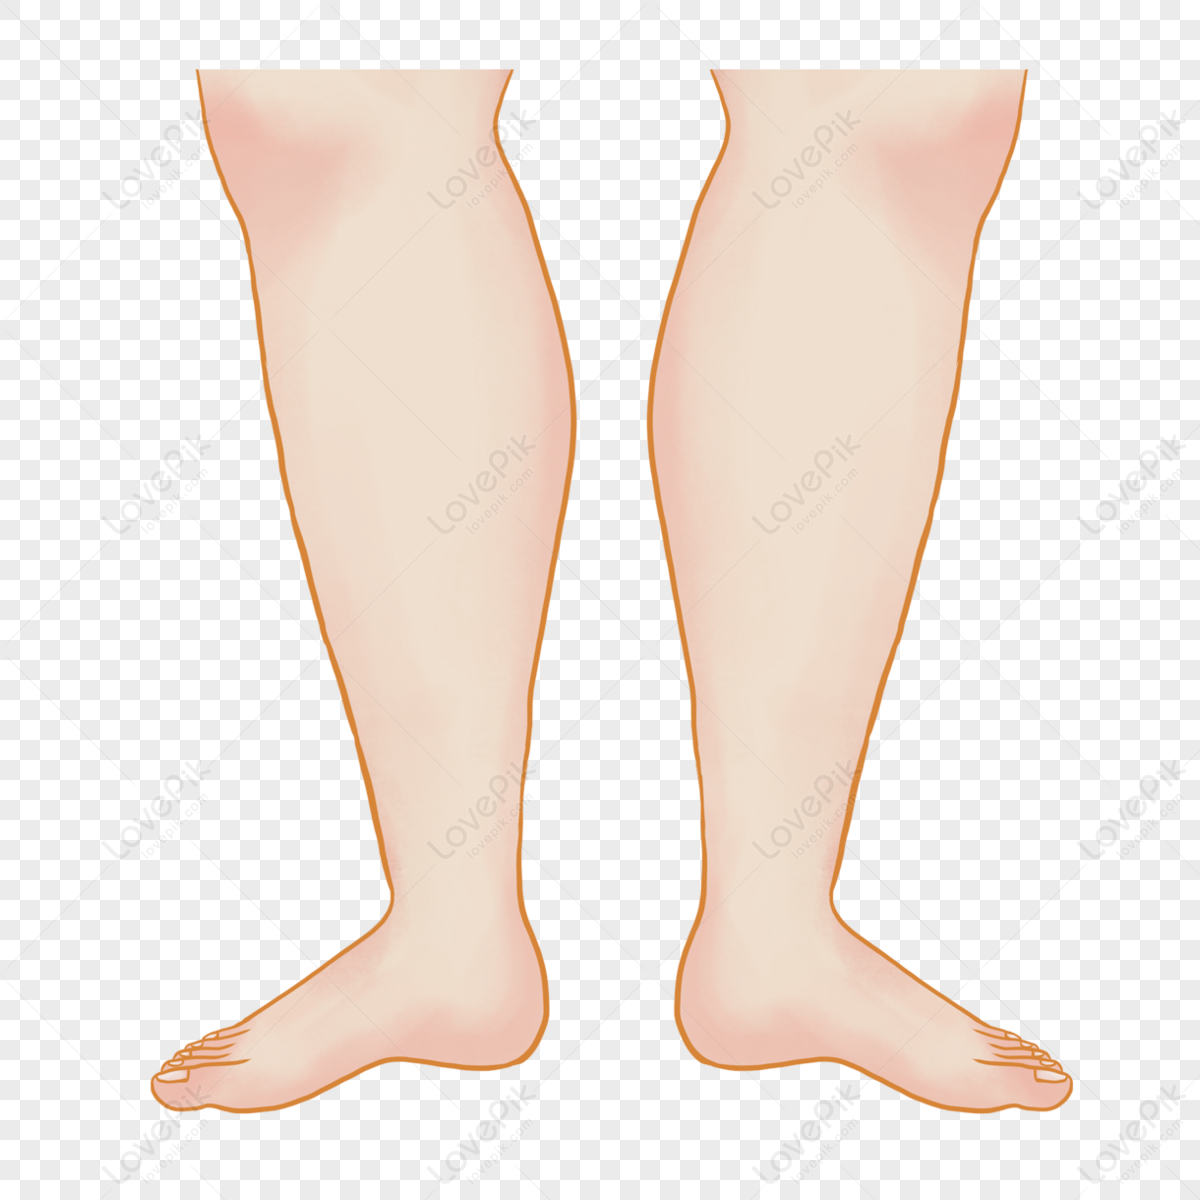 Fat Legs Images, HD Pictures For Free Vectors Download - Lovepik.com